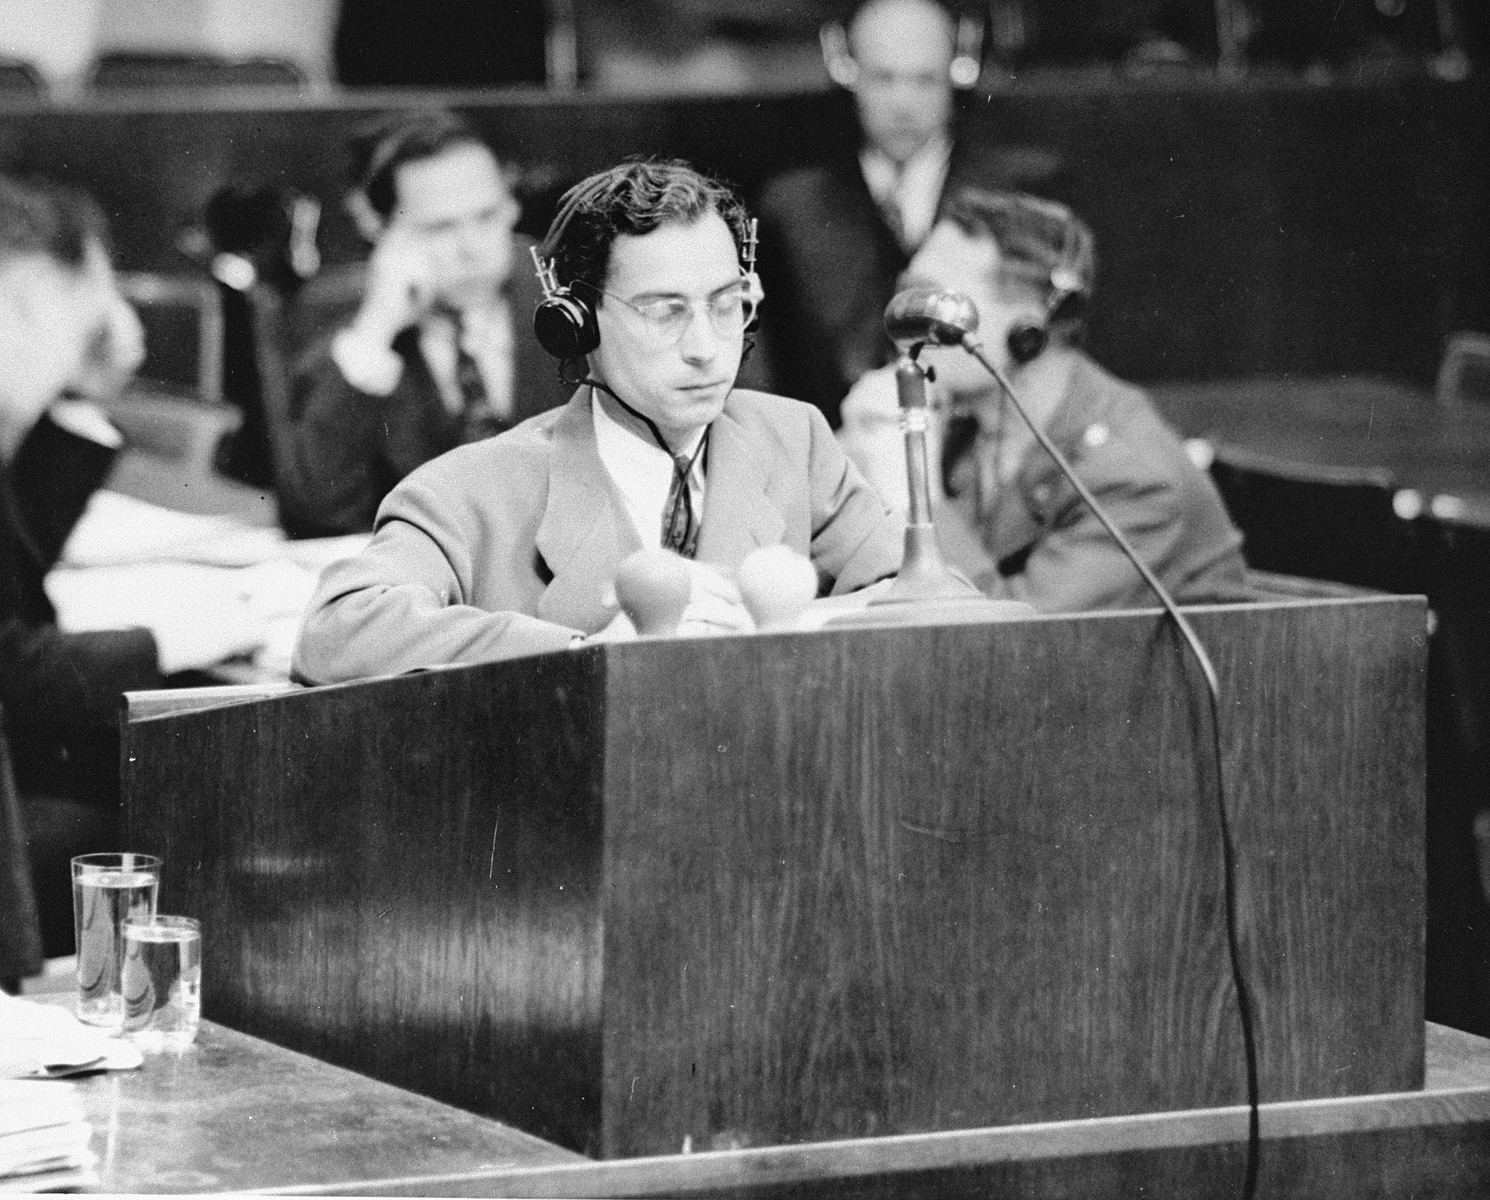 Chief Prosecutor James M. McHaney stands at the speaker's podium during the Medical Case (Doctors') Trial in Nuremberg.

Jack Robbins is seated at the table directly behind McHaney.